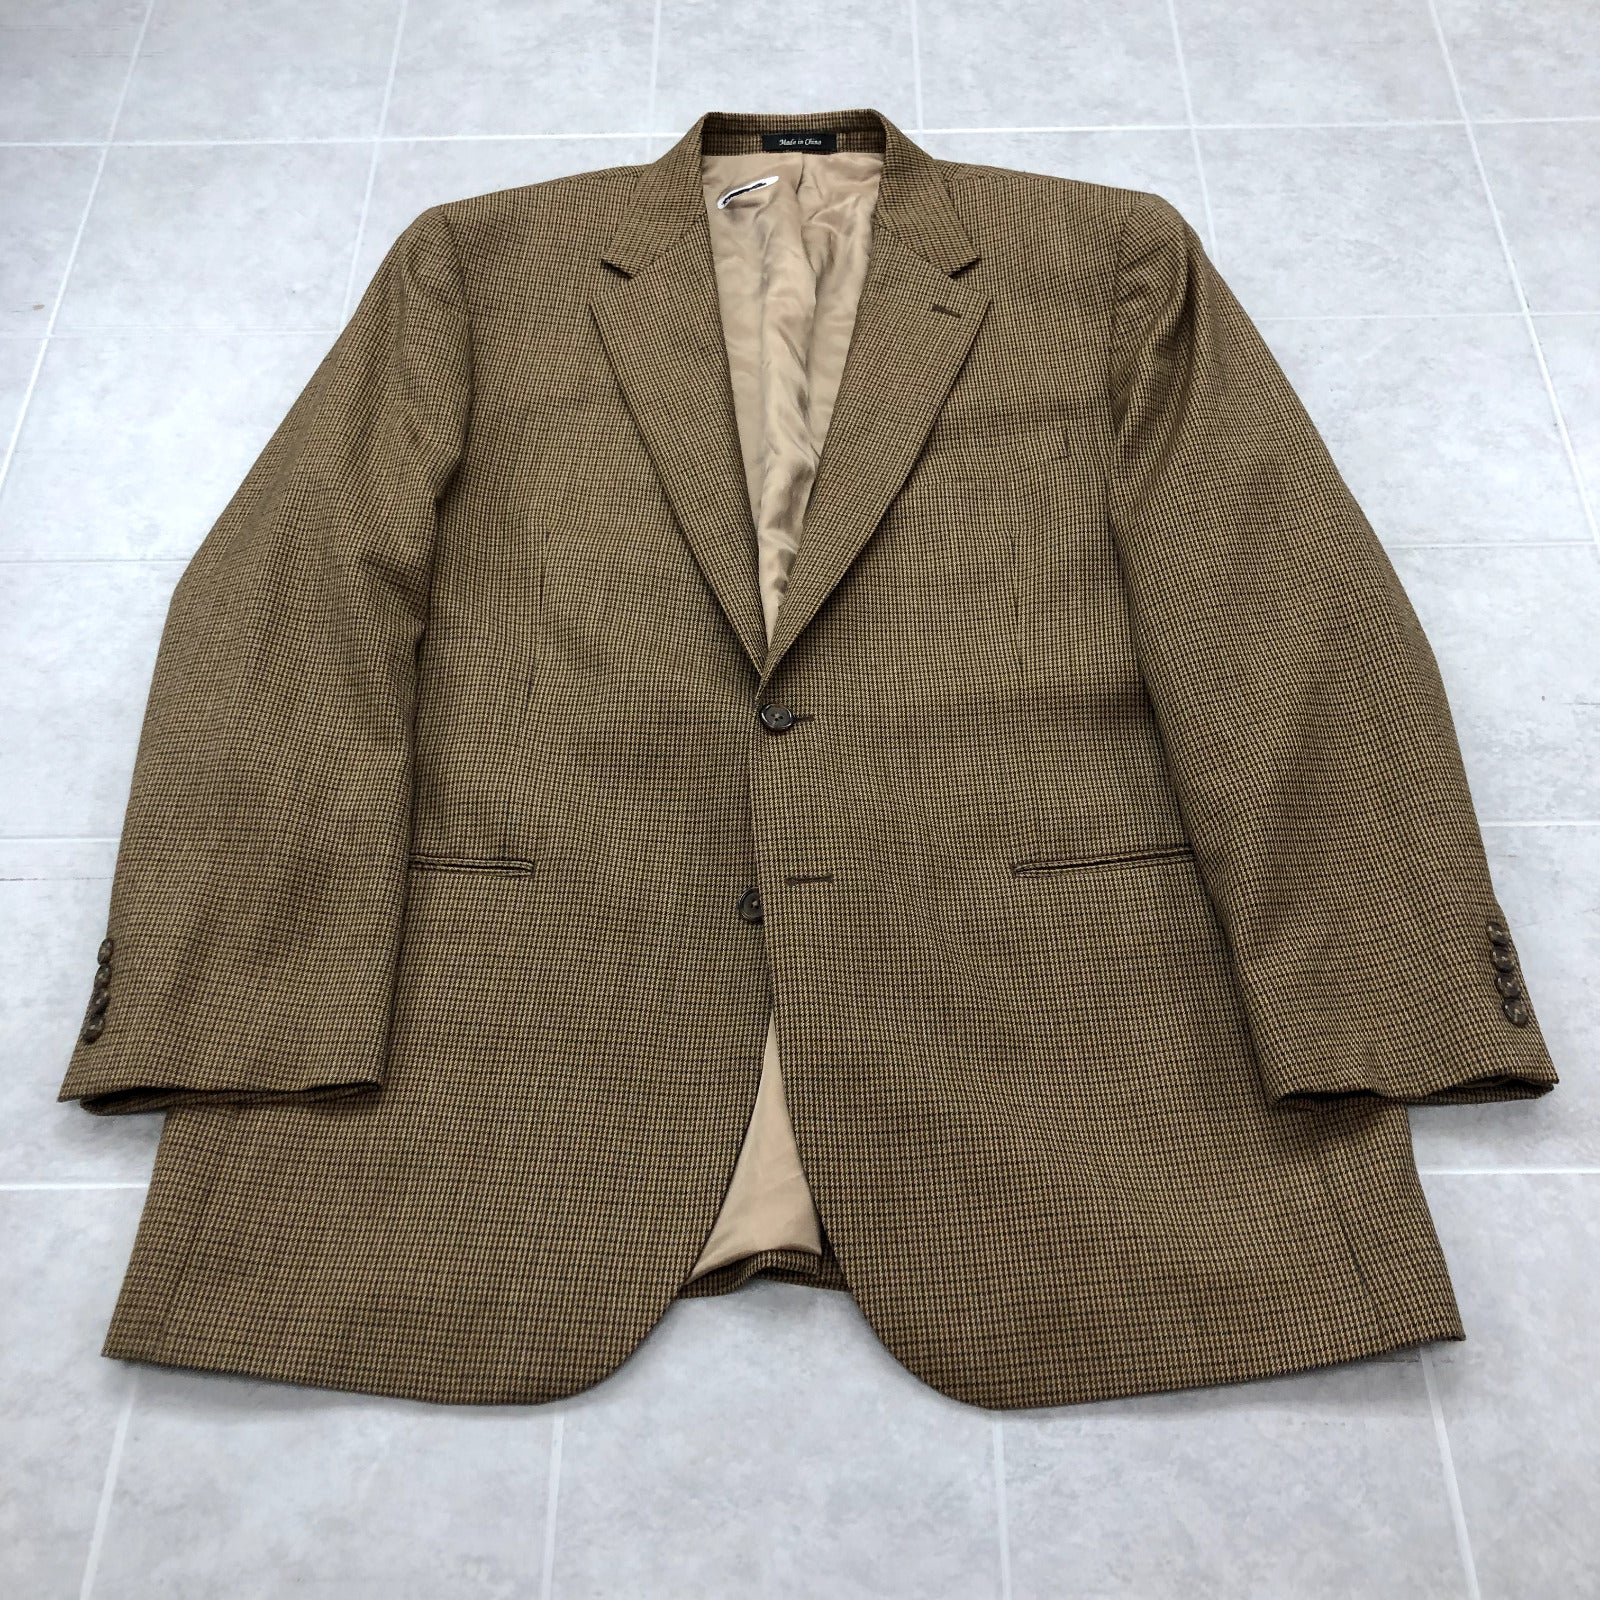 Chaps Beige Houdstooth Lined Single Breasted Notch Lapel Blazer Adult Size 46L